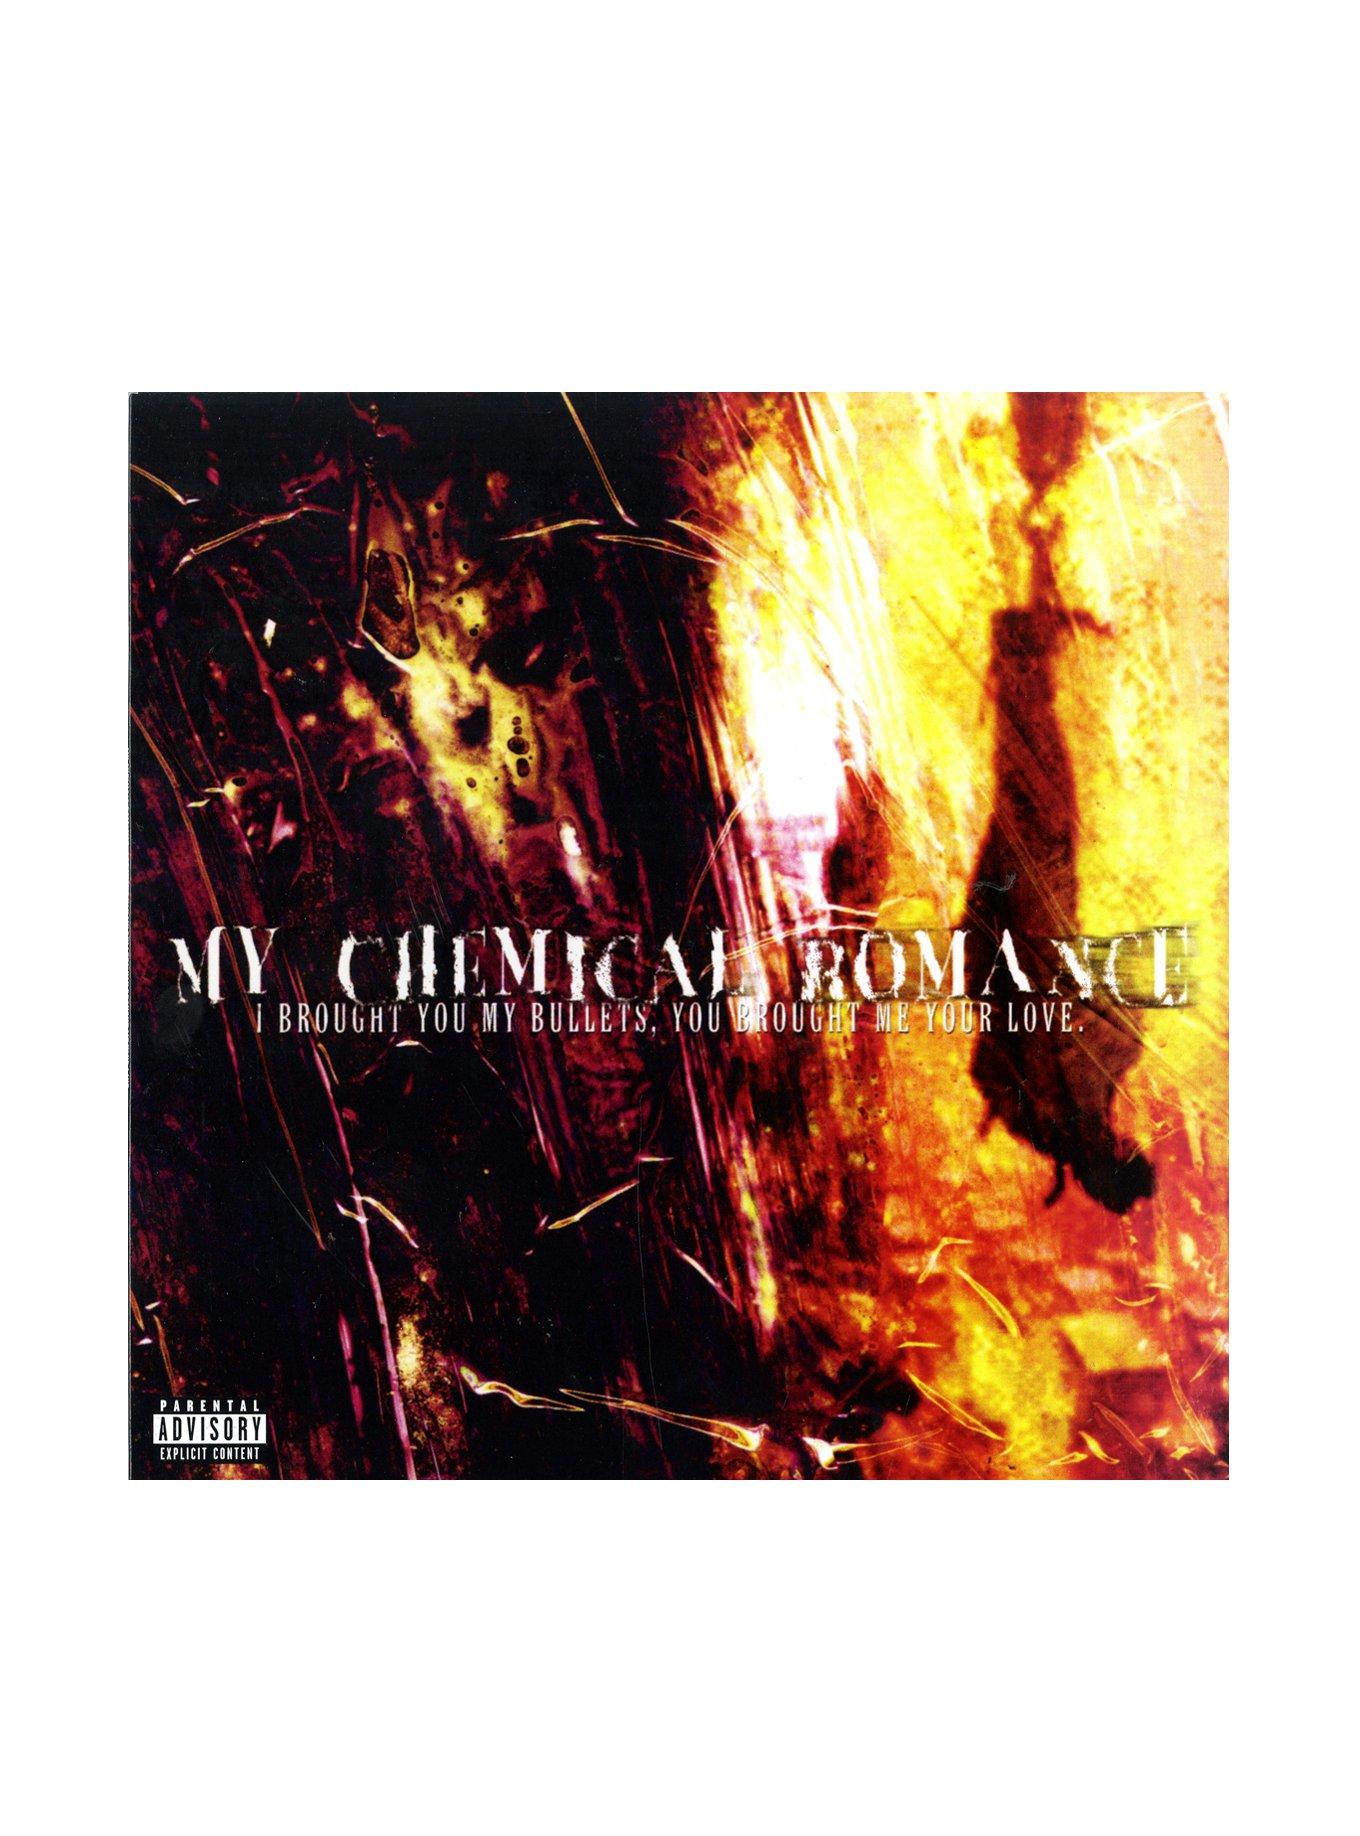 My Chemical Romance - I Brought You My Bullets, You Brought Me Your Love Vinyl LP Hot Topic Exclusive, , hi-res